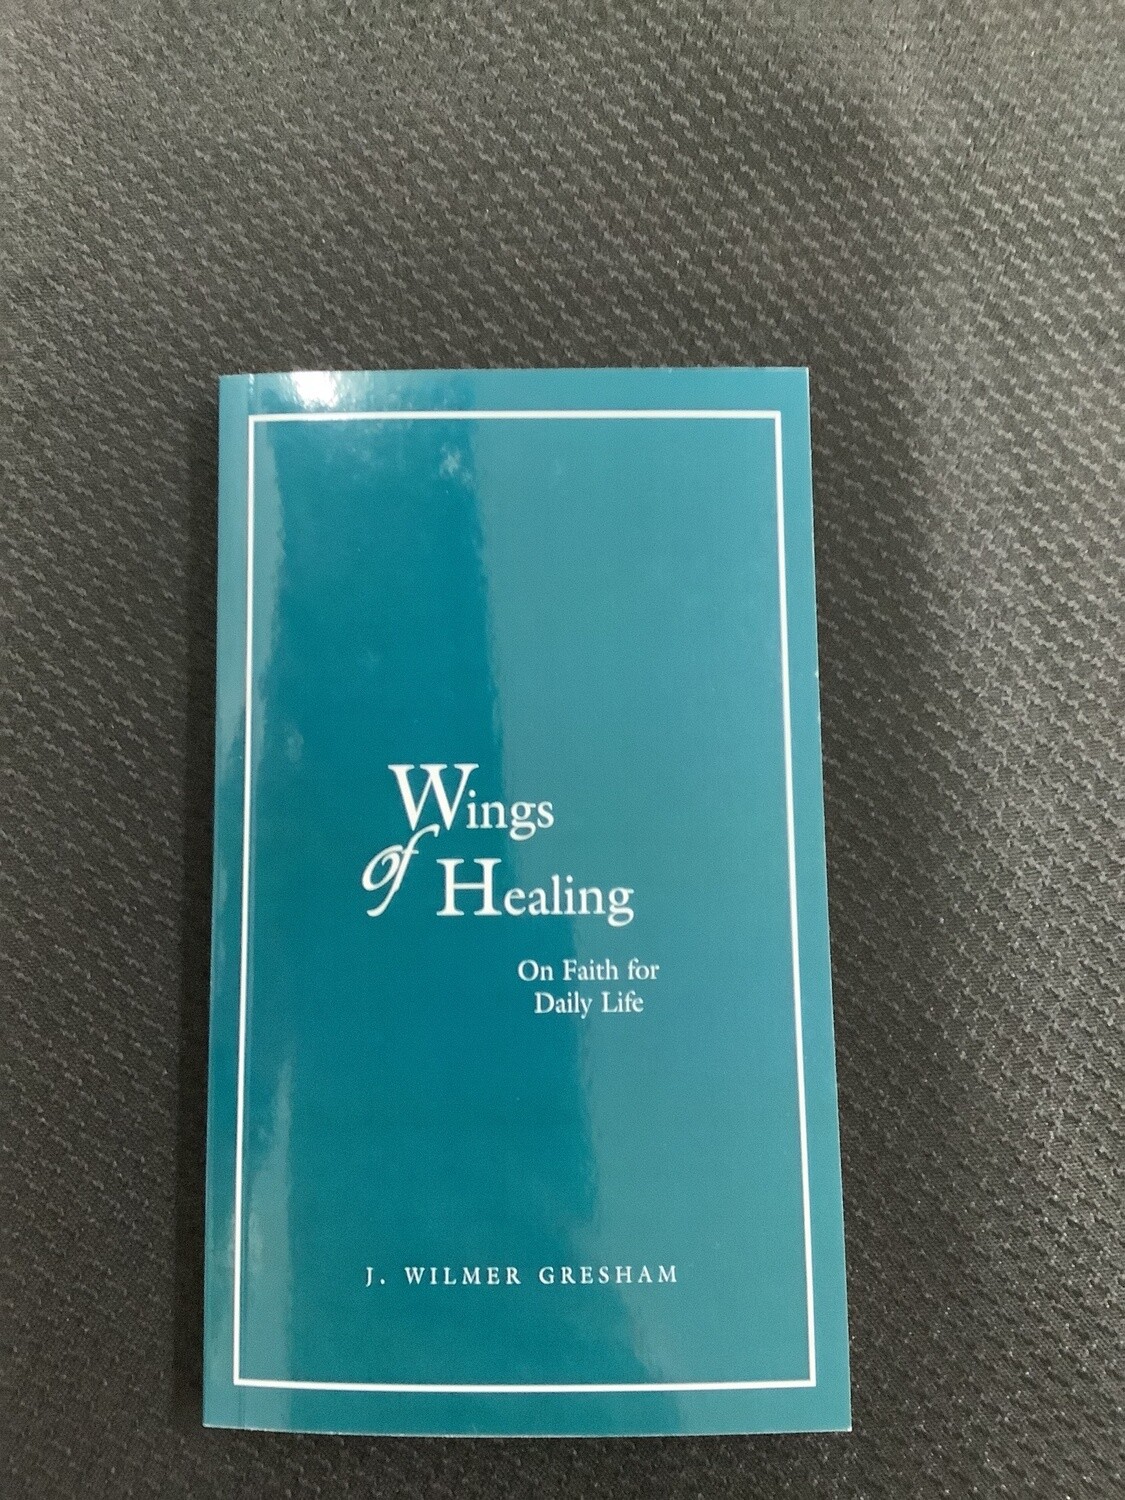 Wings Of Healing On Faith for Daily Life- J. Wilmer Gresham